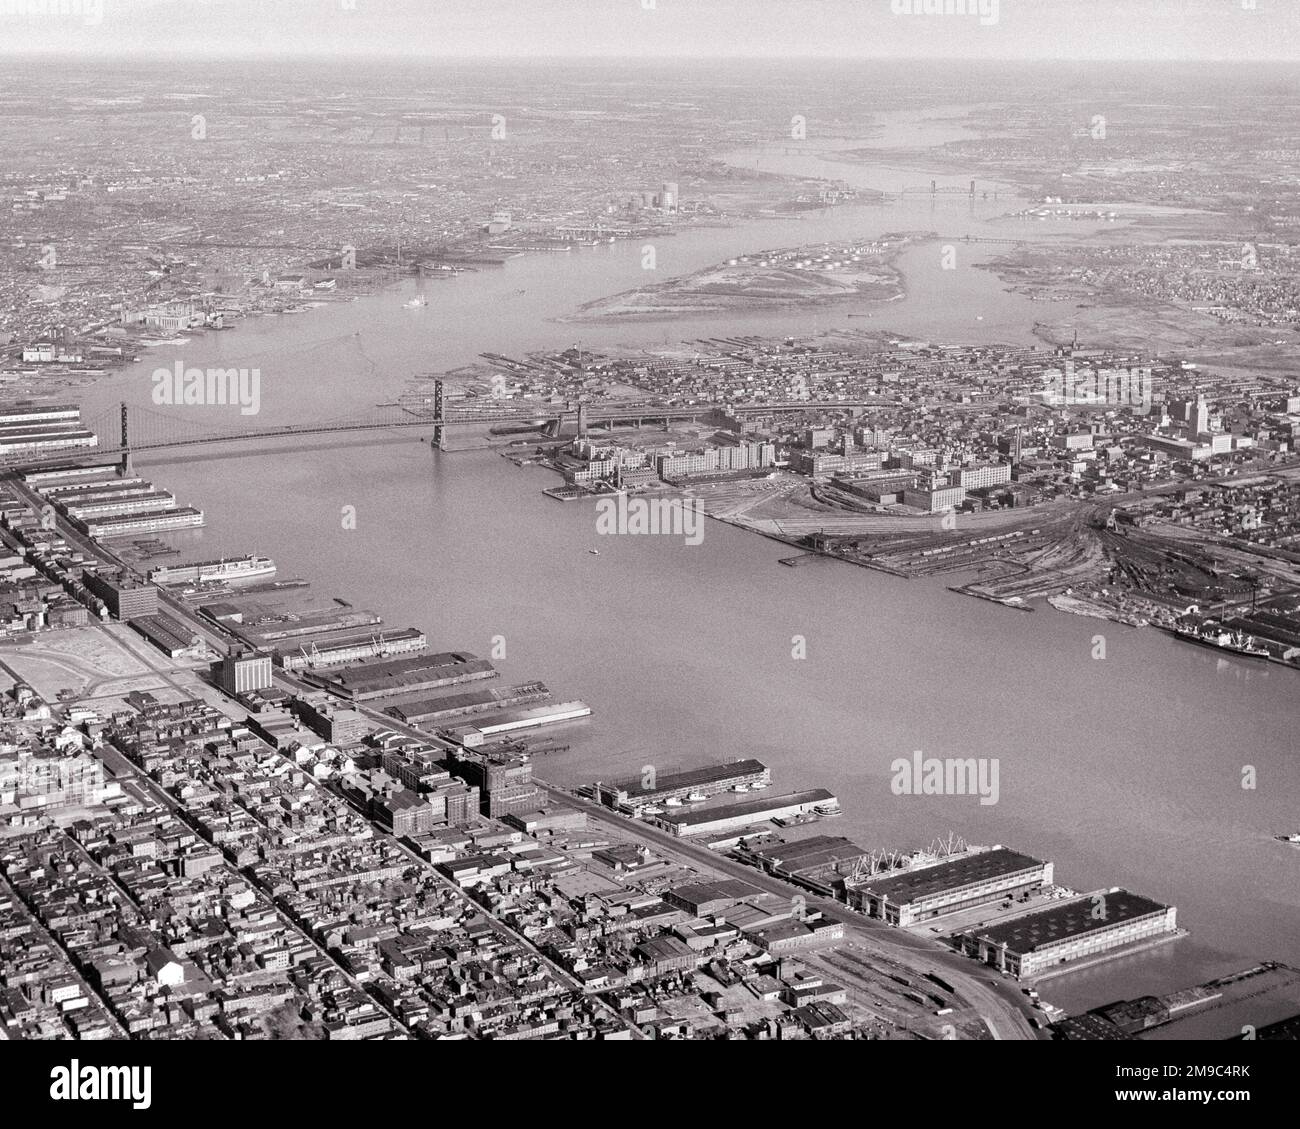 1950s 1960s AERIAL LOOKING NORTH UP DELAWARE RIVER PAST BEN FRANKLIN BRIDGE AND WATERFRONT WHARFS IN PHILADELPHIA PA USA - a1197 HAR001 HARS BOUNDARY DELAWARE RIVER WATERFRONT BLACK AND WHITE HAR001 OLD FASHIONED Stock Photo